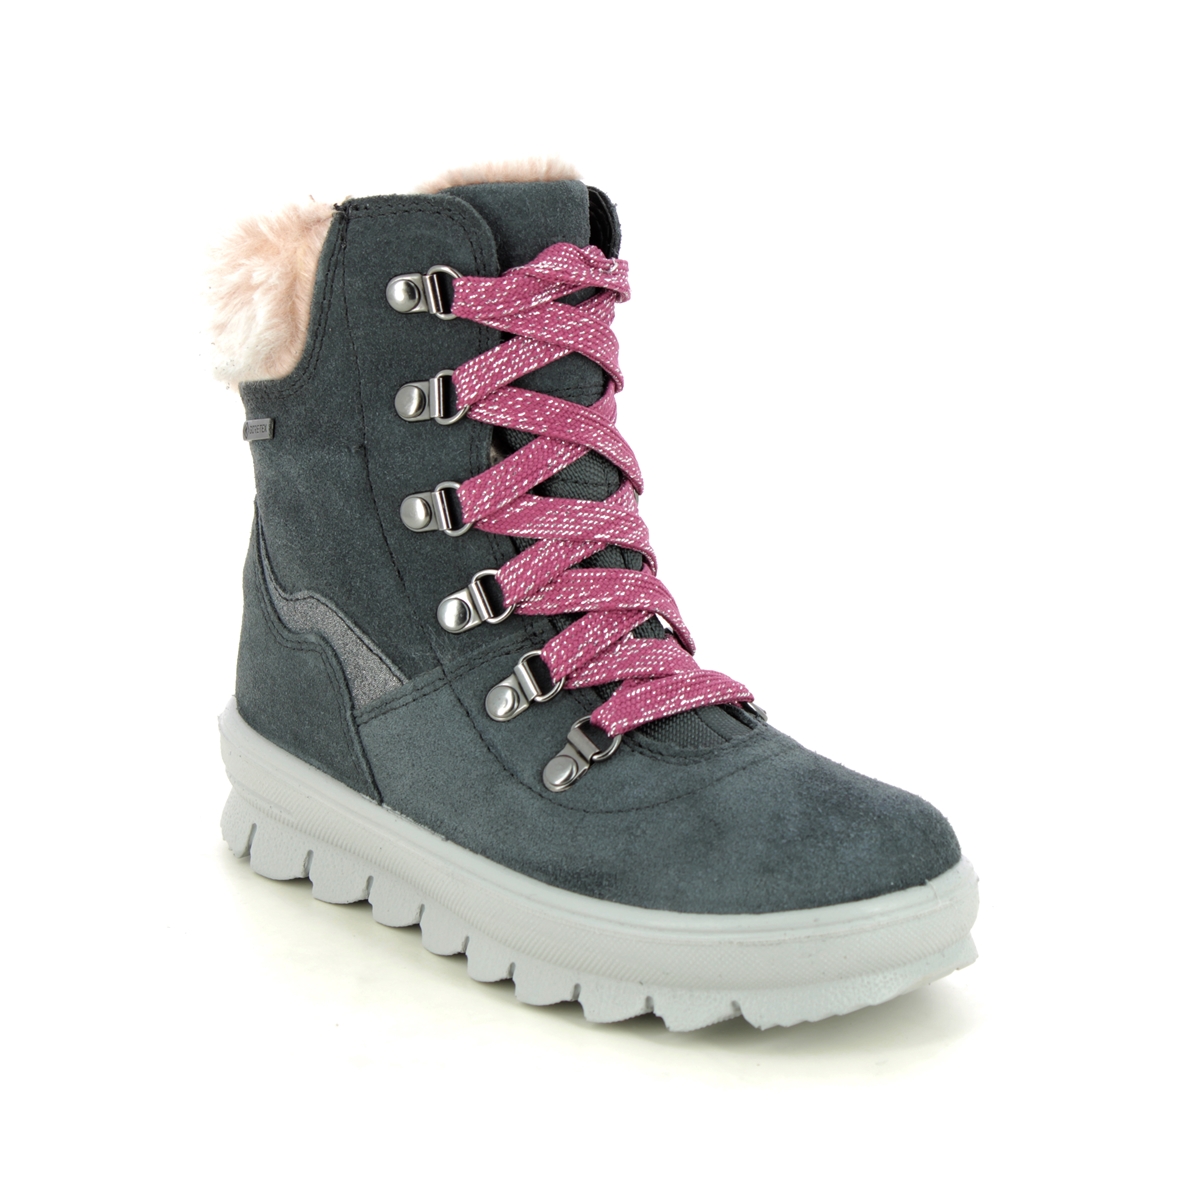 Superfit Flavia Lace Gtx Grey Suede Kids Girls Boots 1000220-2000 In Size 34 In Plain Grey Suede